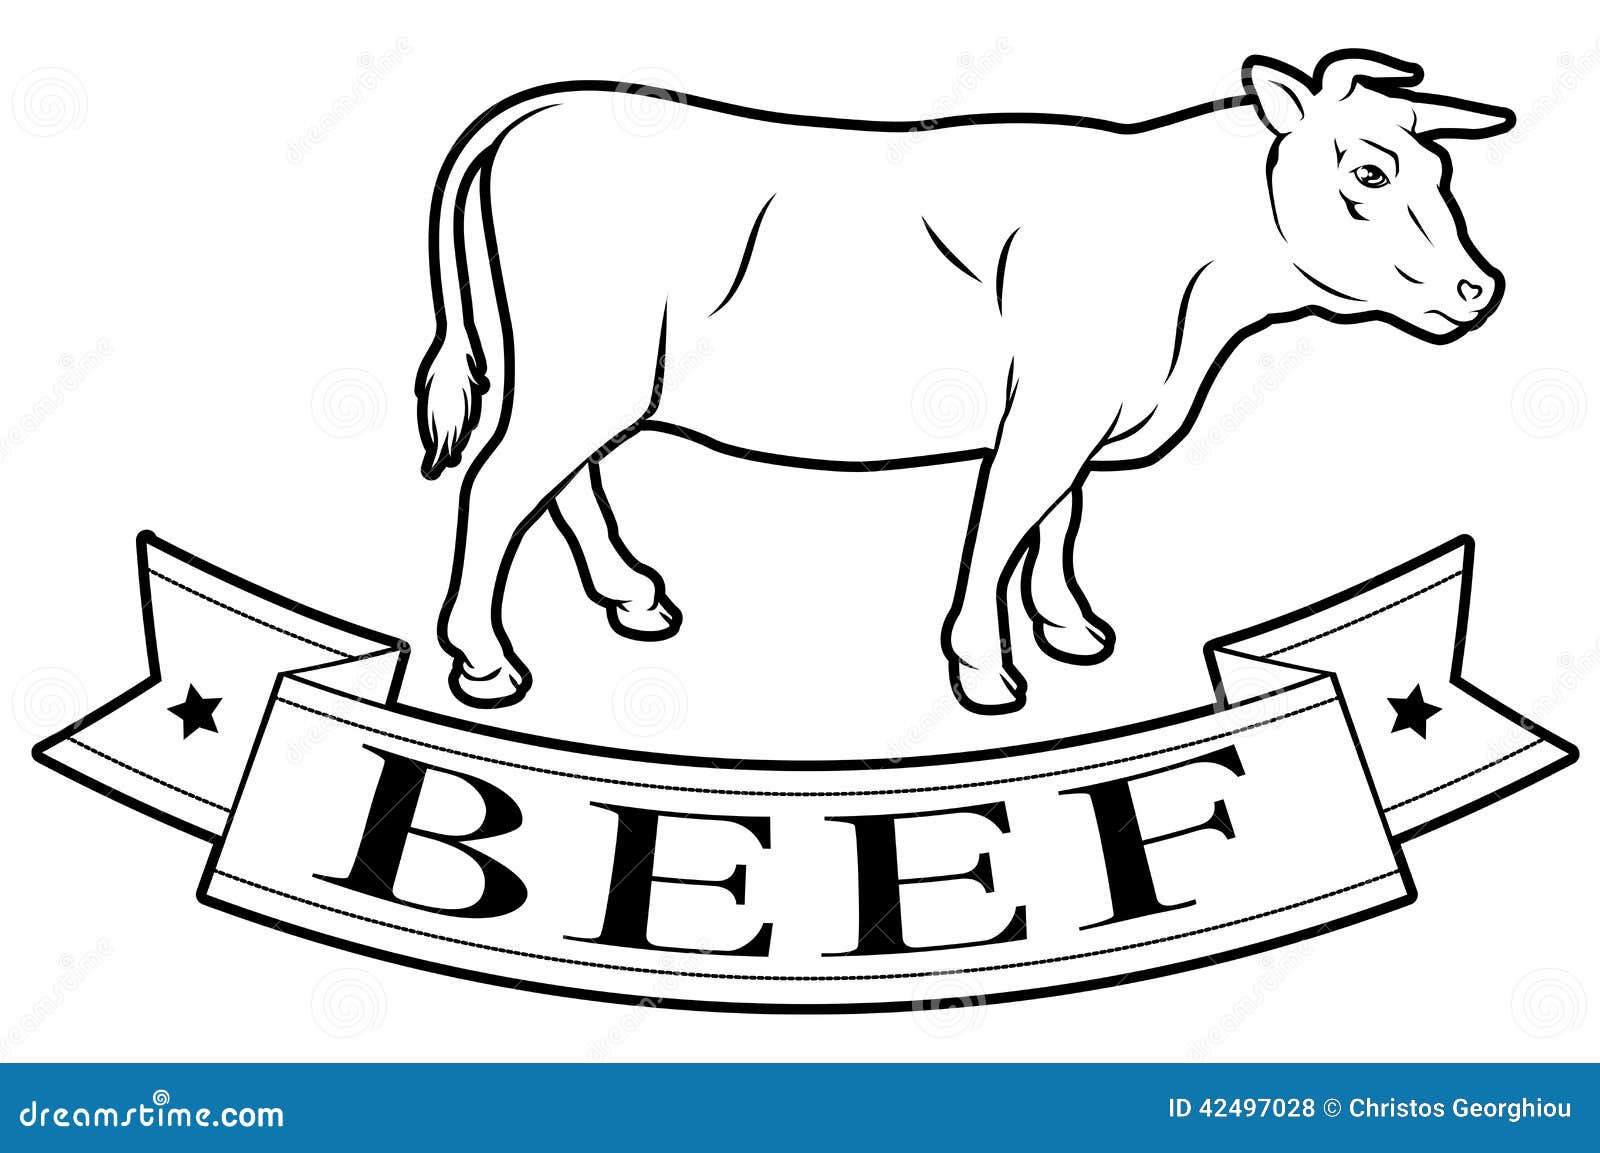 clipart for food labels - photo #37